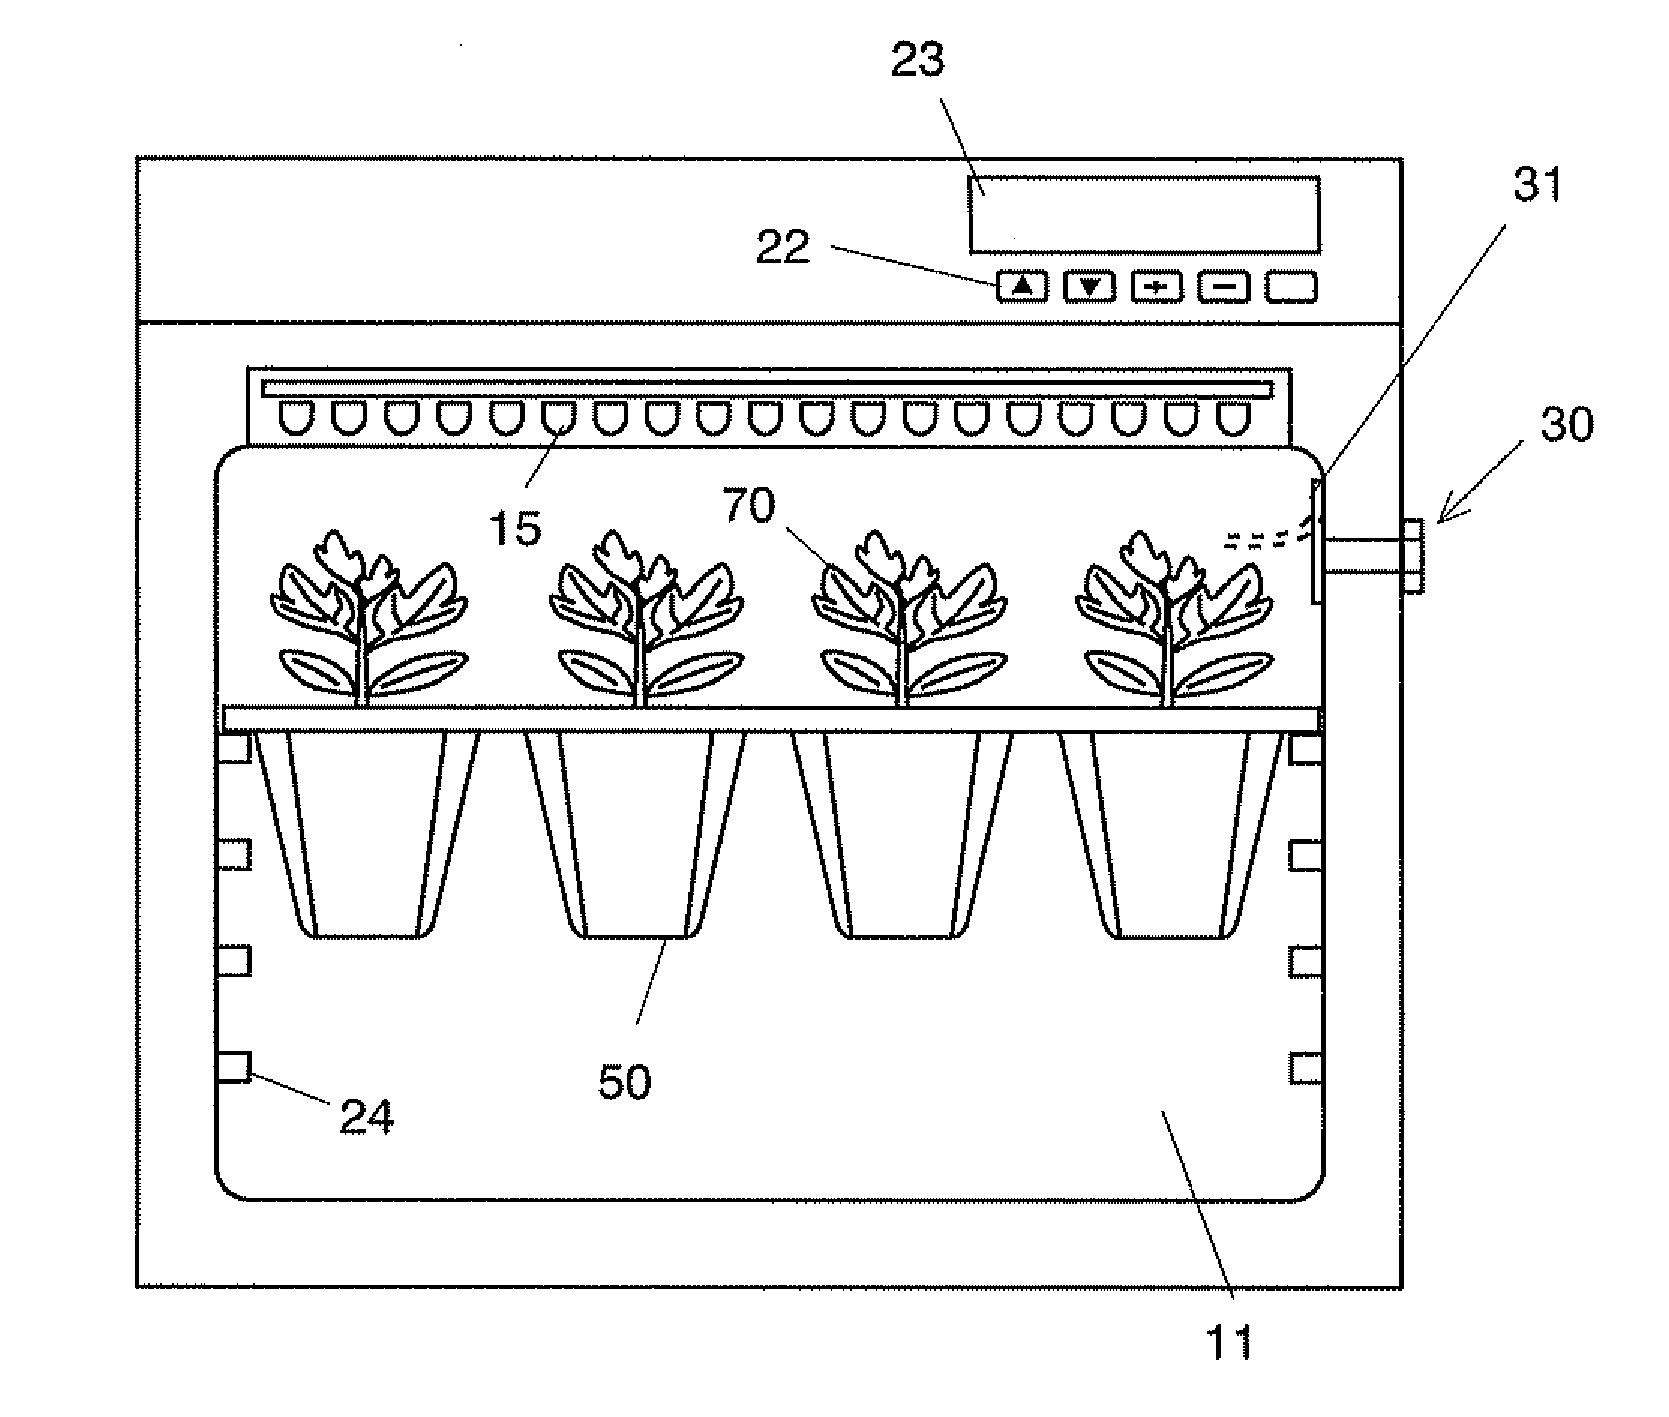 Germination/growing apparatus and plant cultivation device